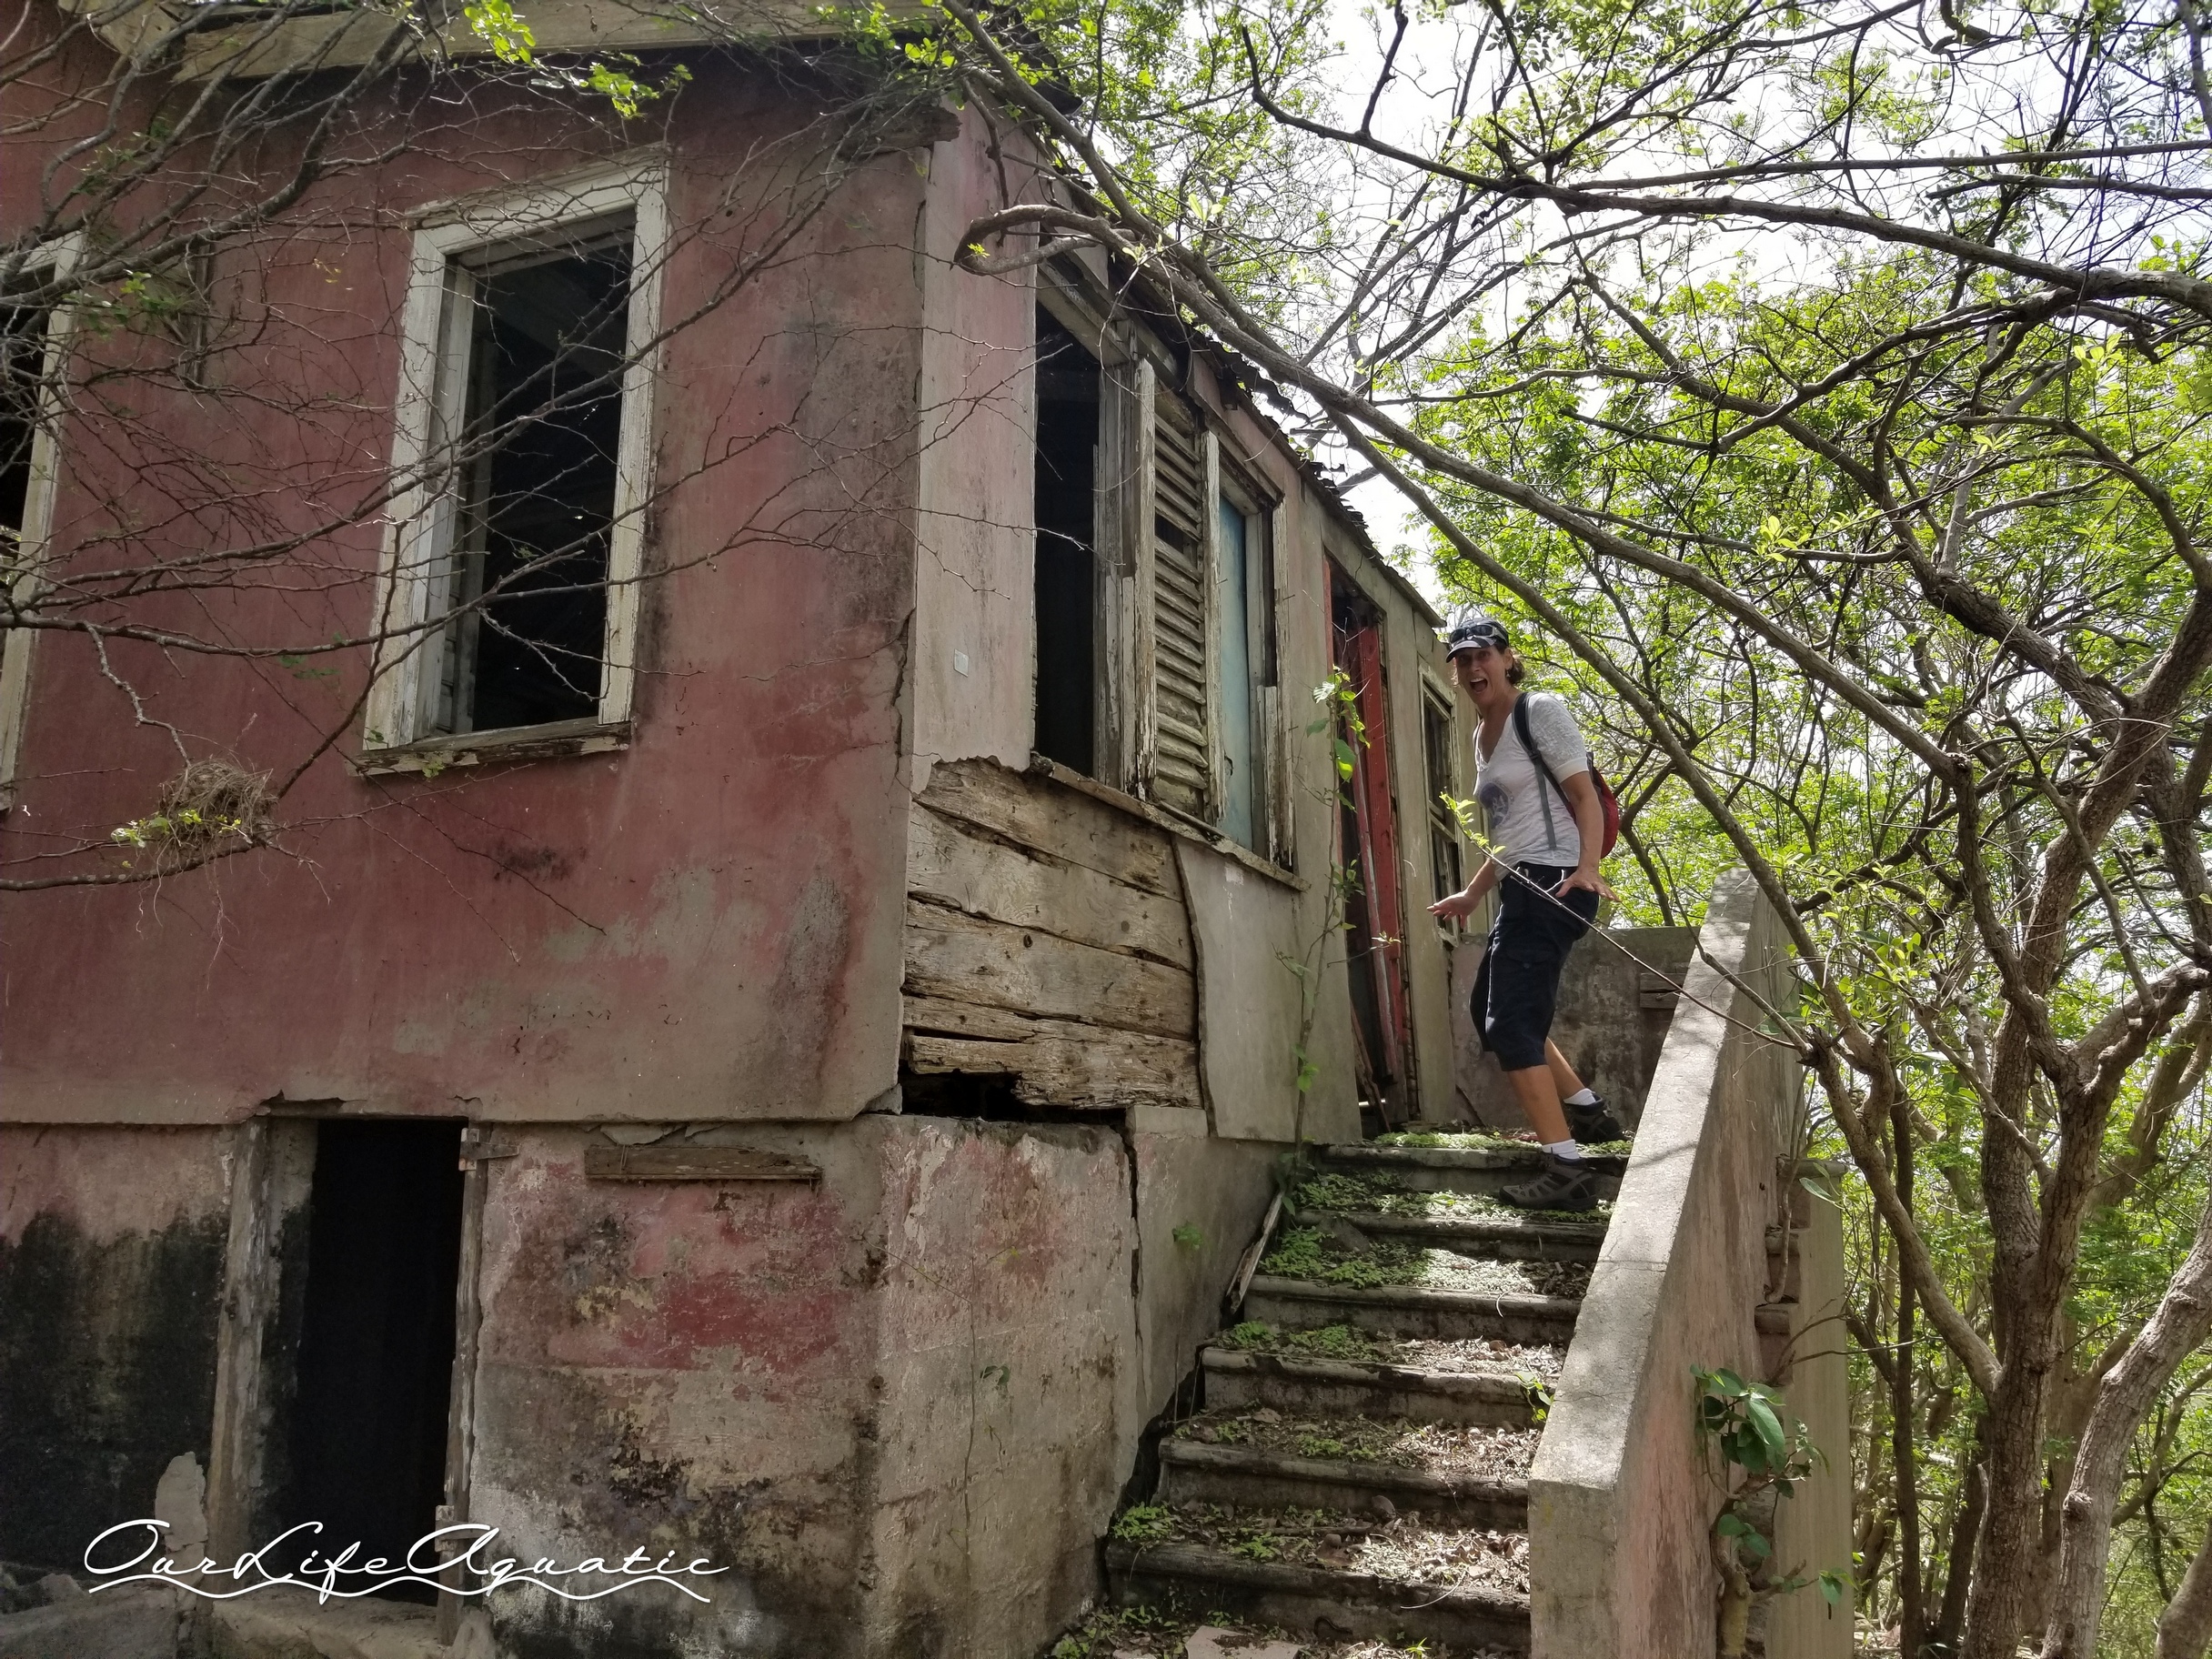 Exploring an abandoned house deep in the woods -- what could possibly go wrong?